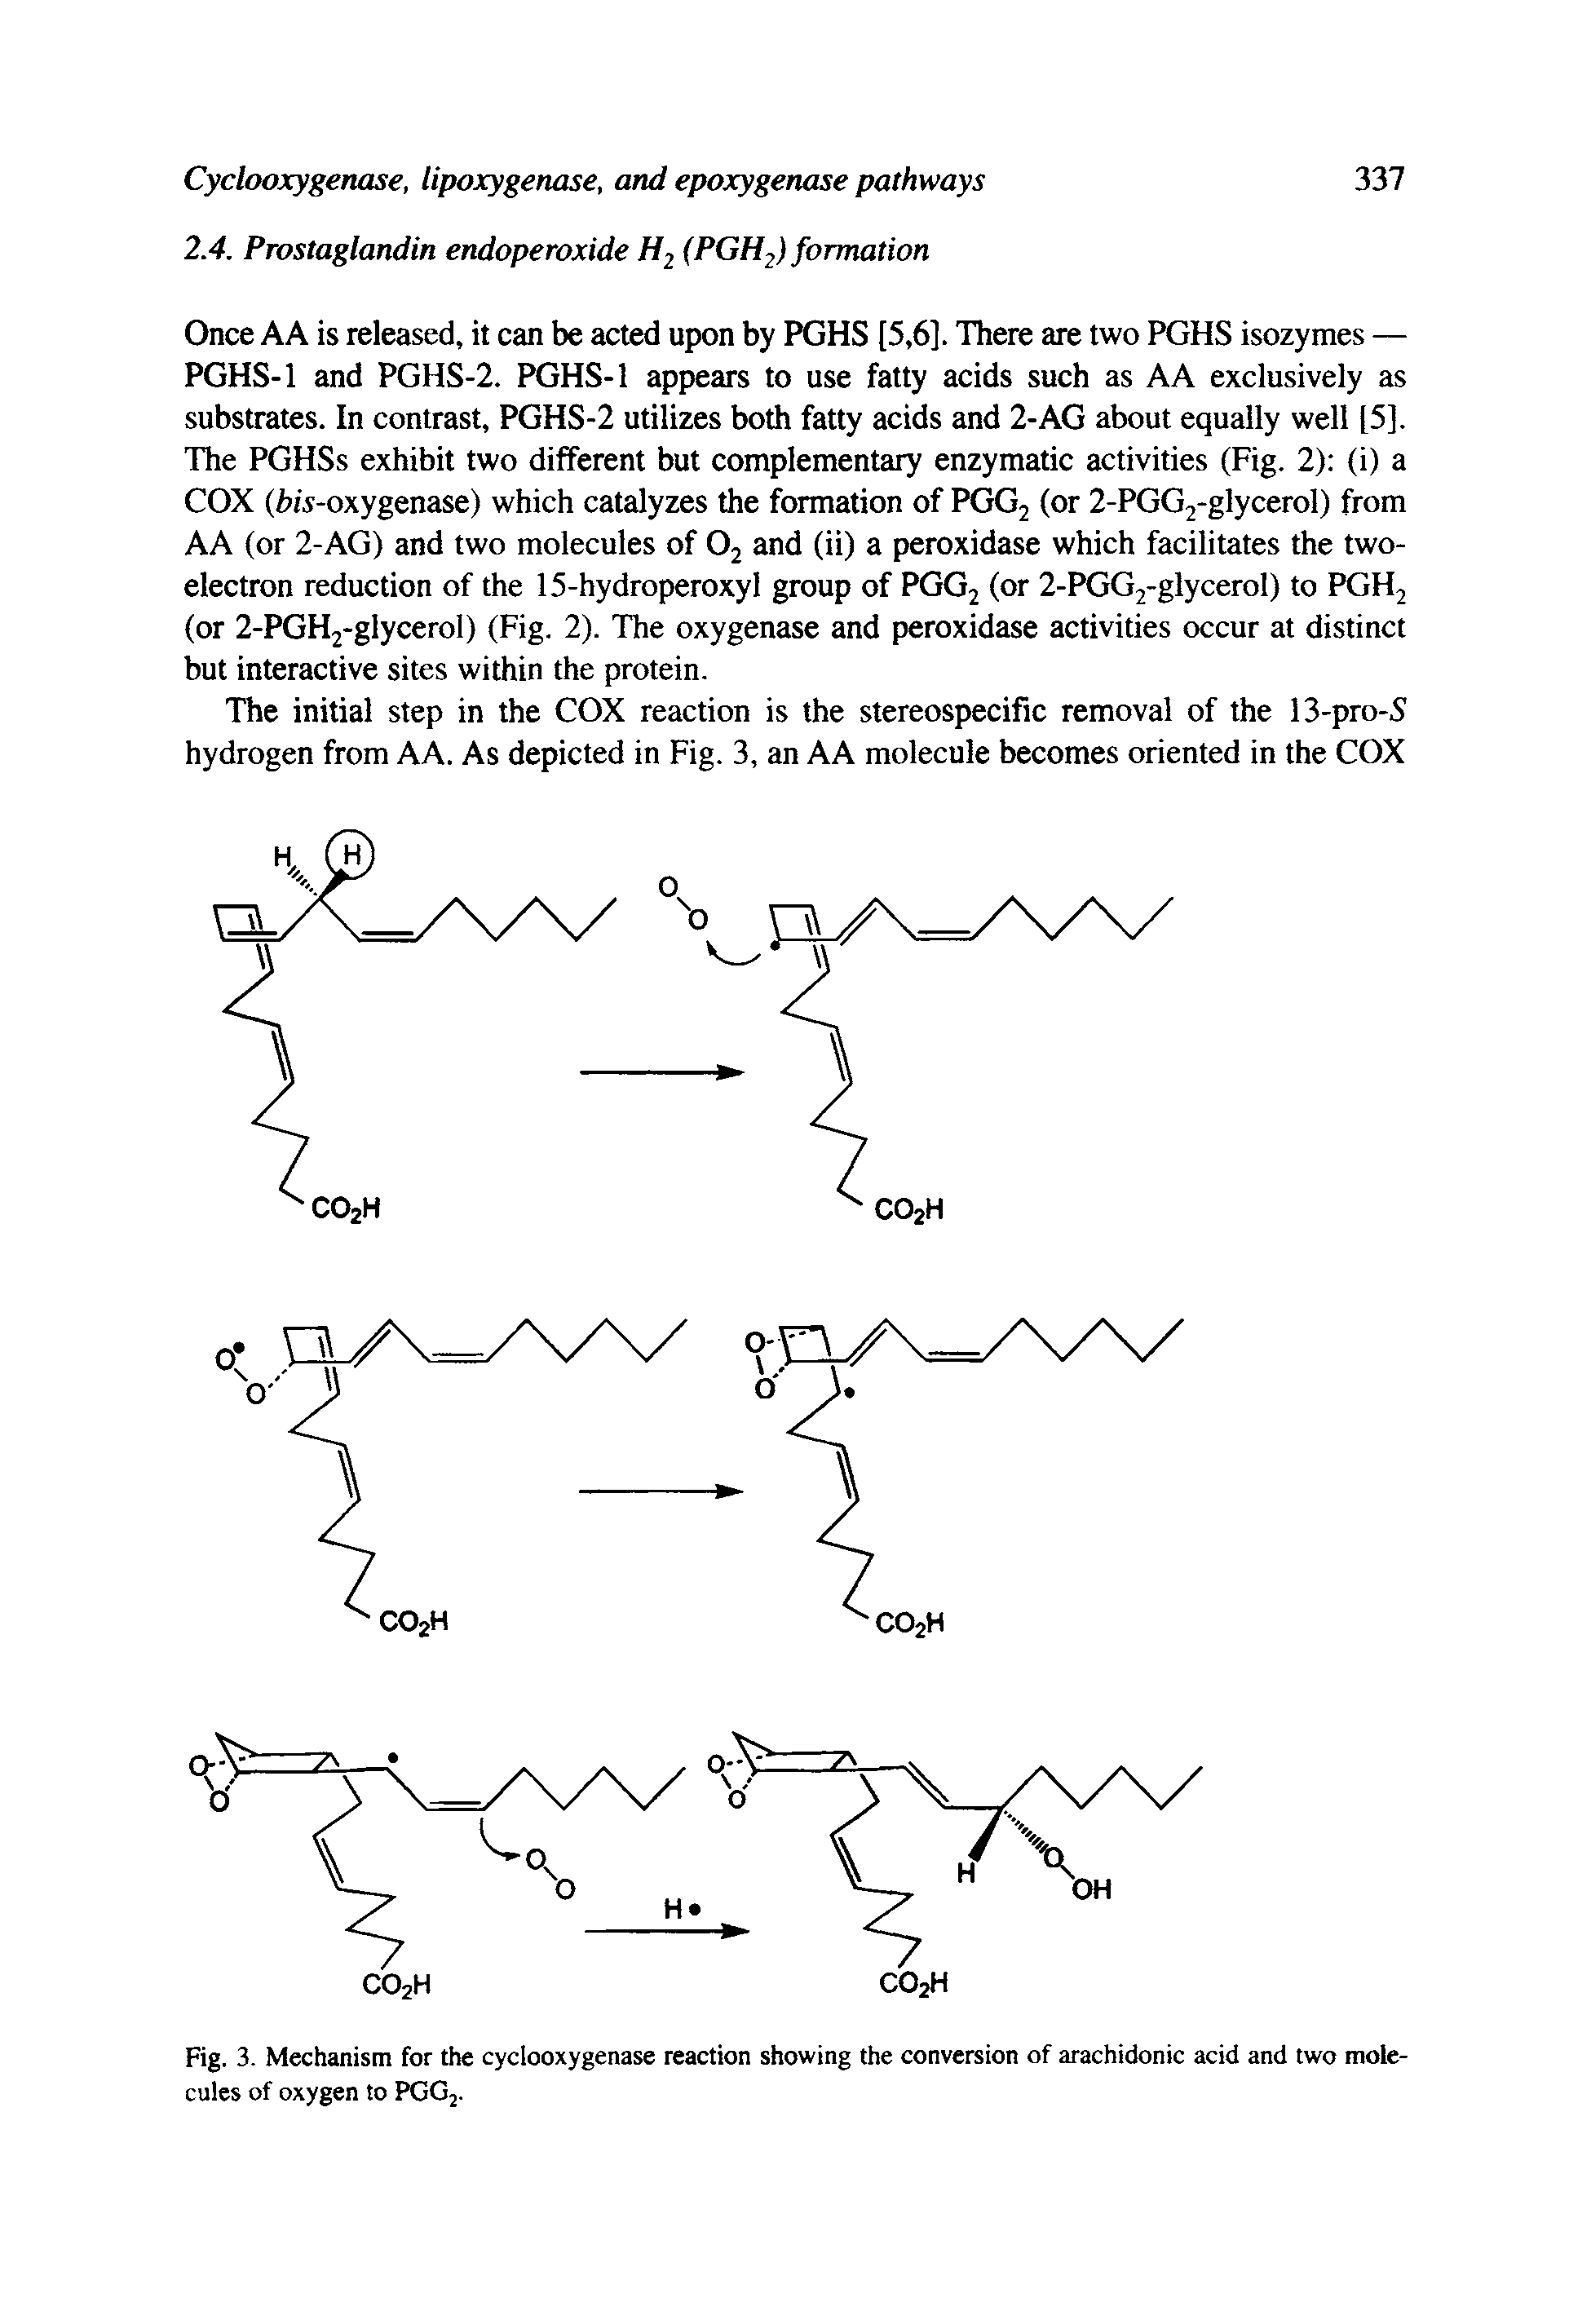 Fig. 3. Mechanism for the cyclooxygenase reaction showing the conversion of arachidonic acid and two molecules of oxygen to PGGj.